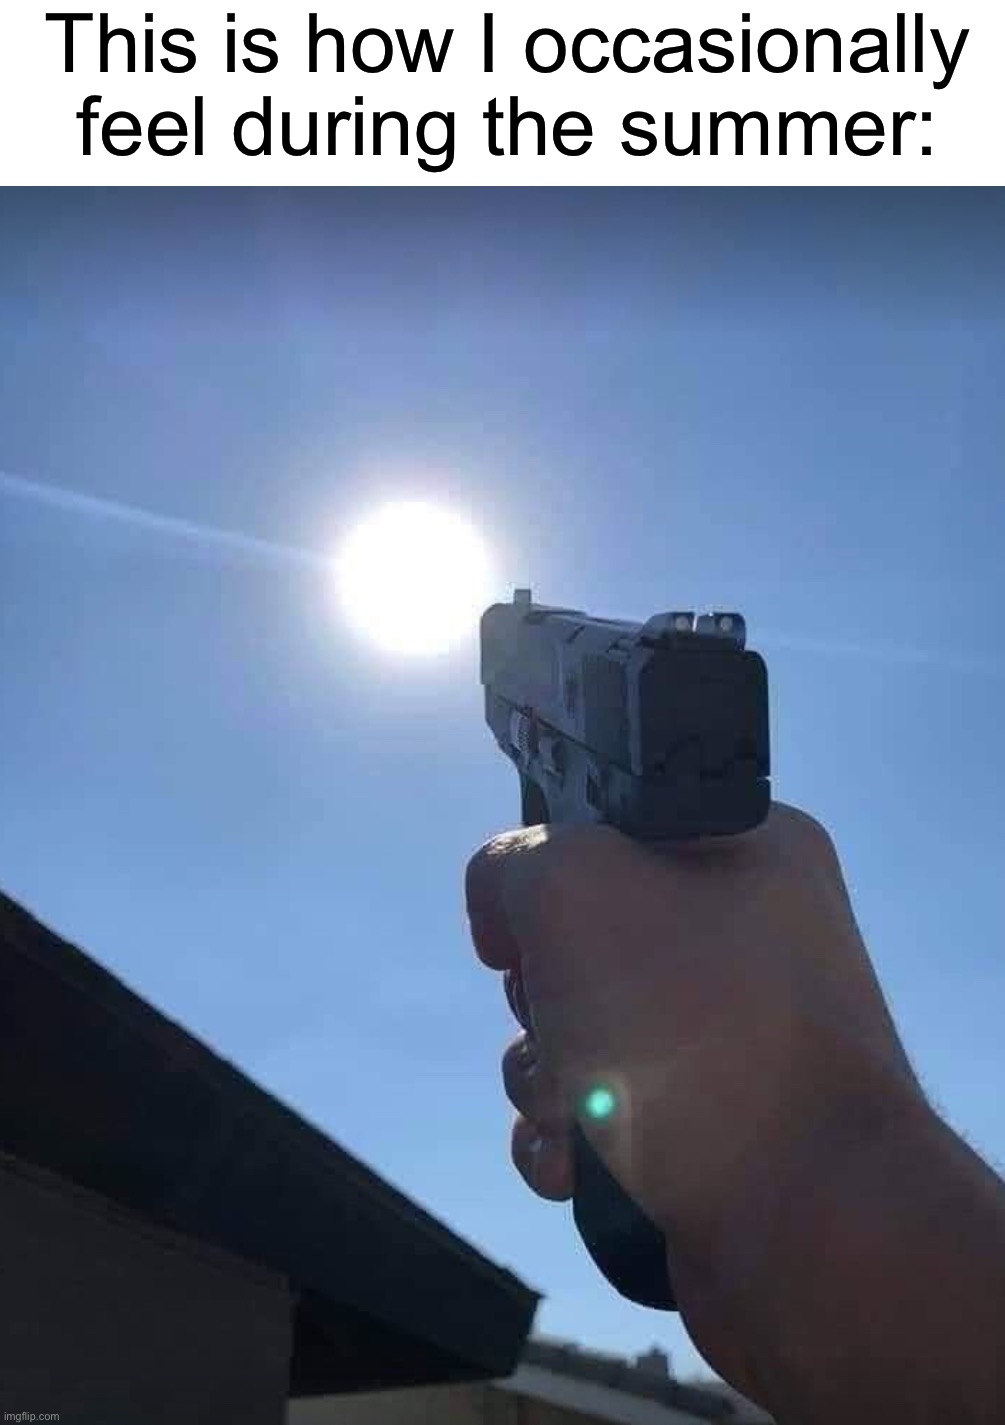 I want to shoot the sun | This is how I occasionally feel during the summer: | image tagged in memes,funny,true story,relatable memes,summer,sun | made w/ Imgflip meme maker